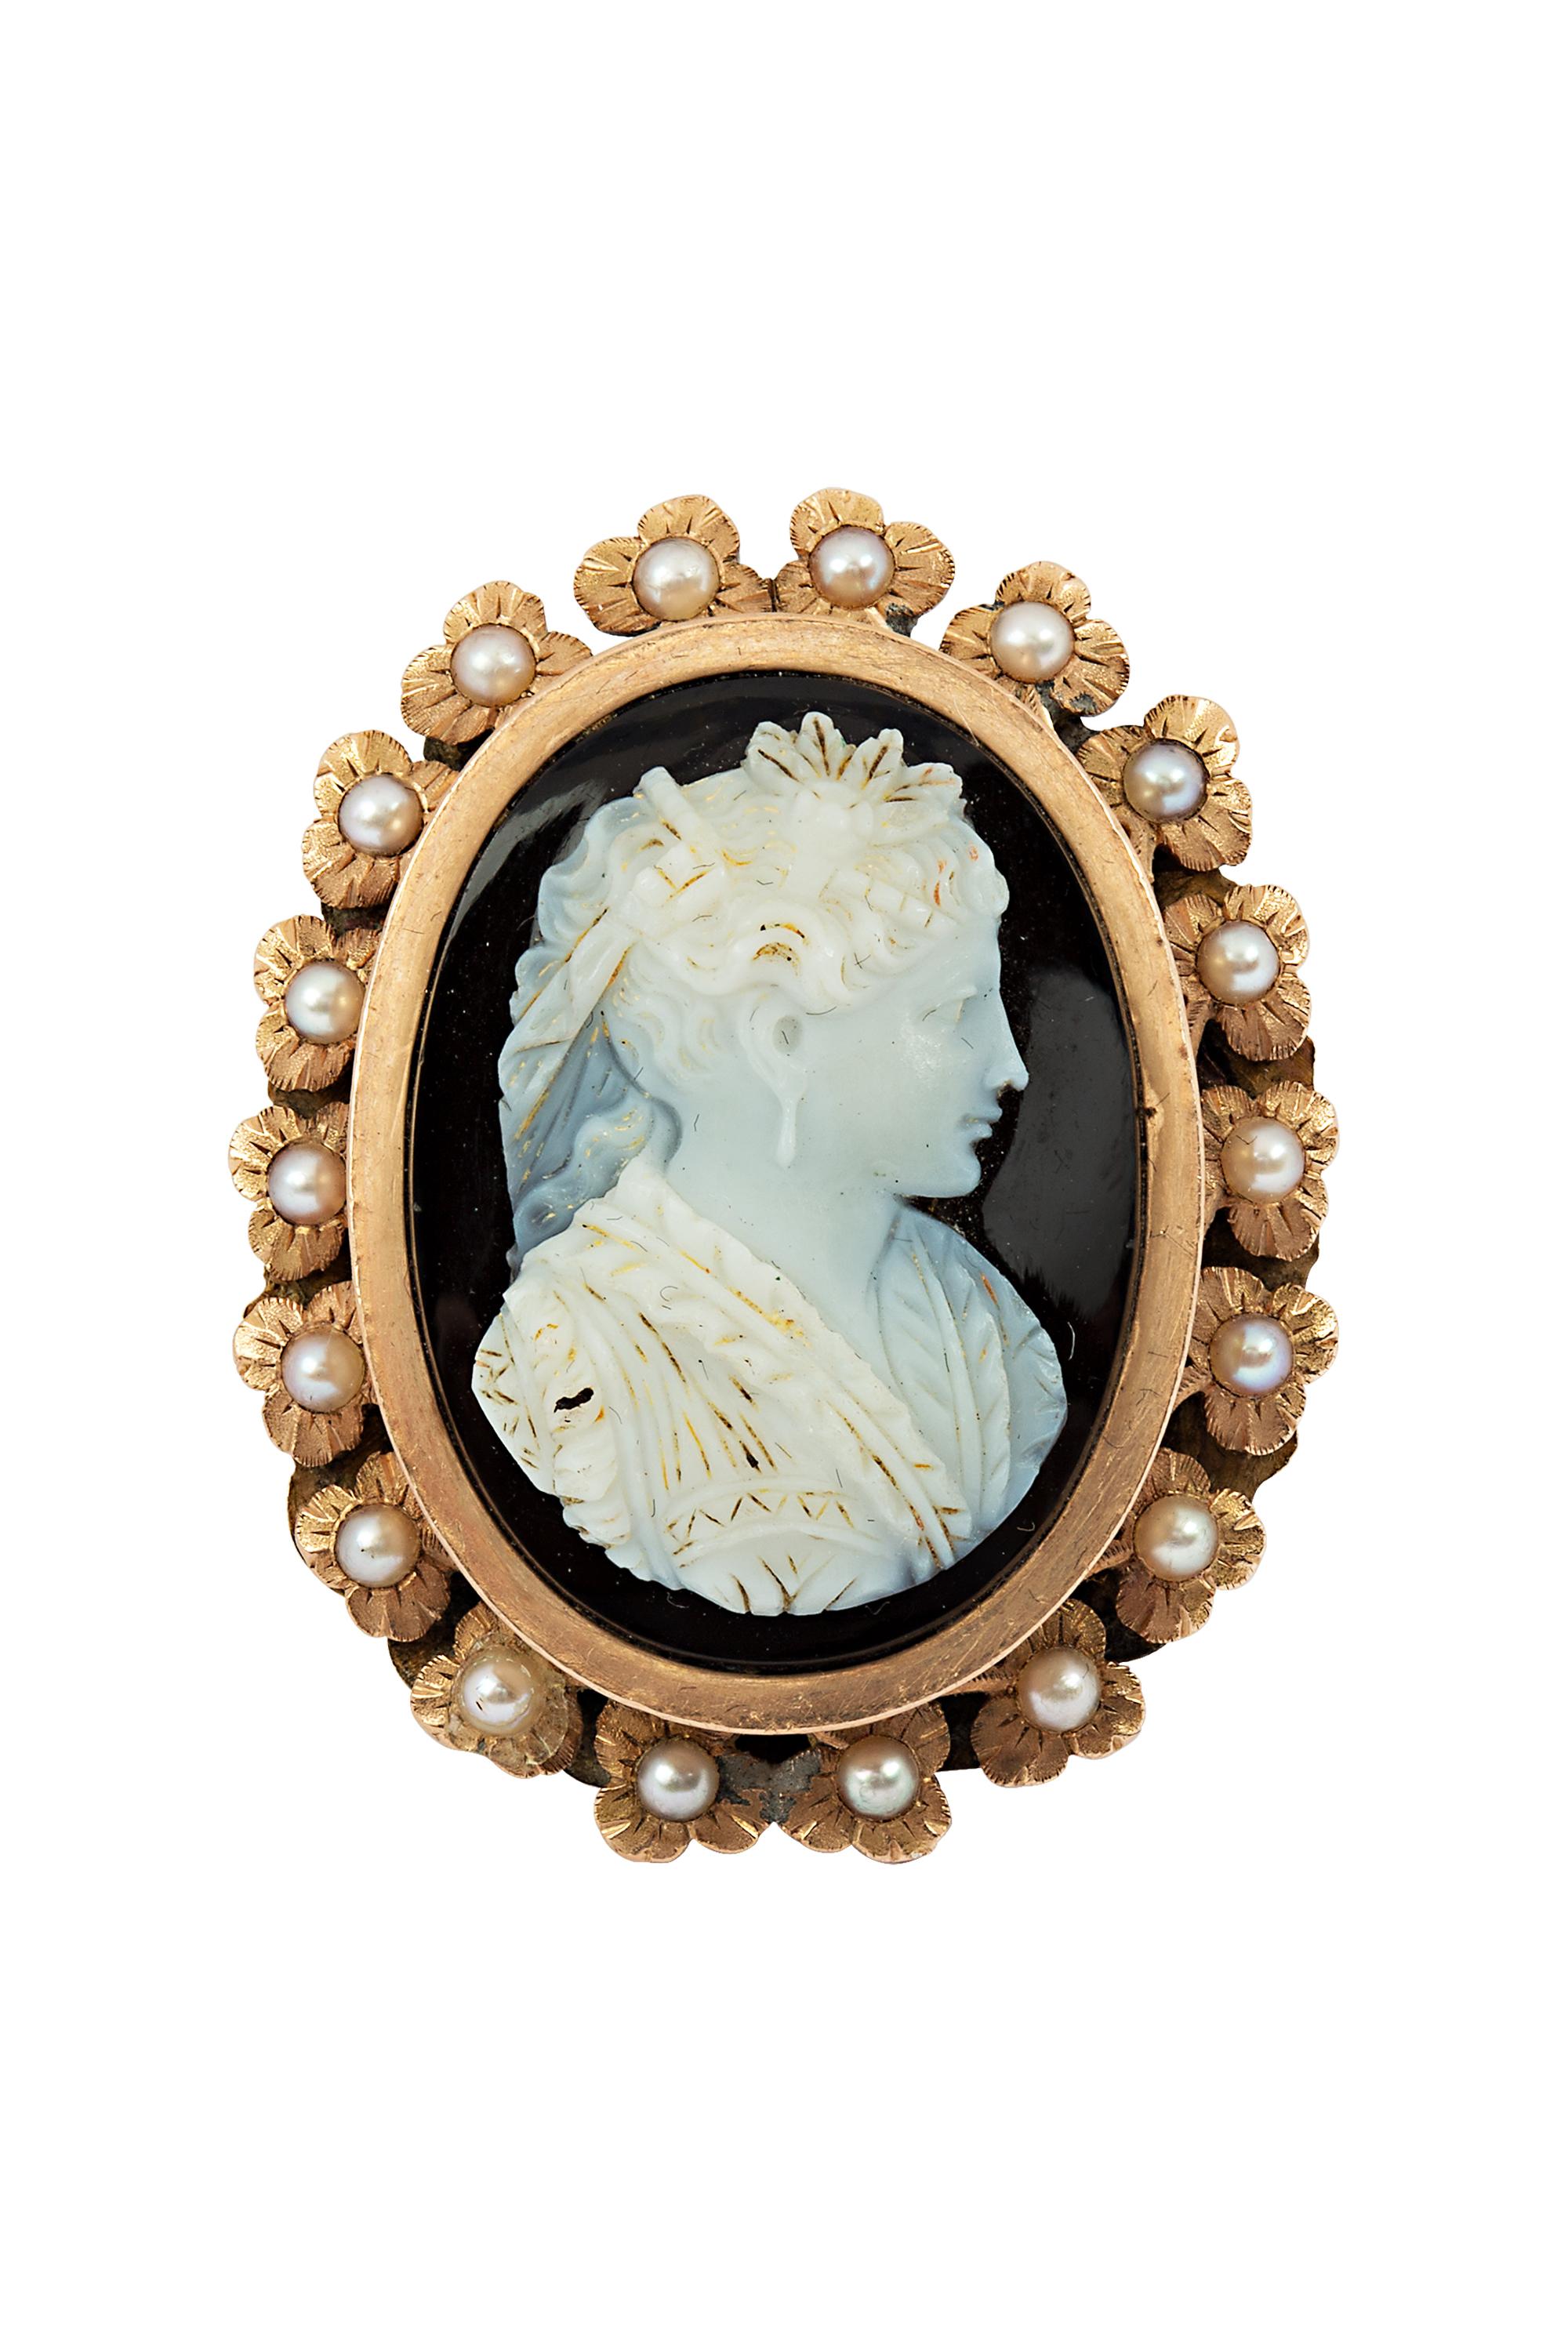 Antique 19th Century Natural Pearl Onyx Cameo Ring and Pendant Set In Good Condition For Sale In beverly hills, CA